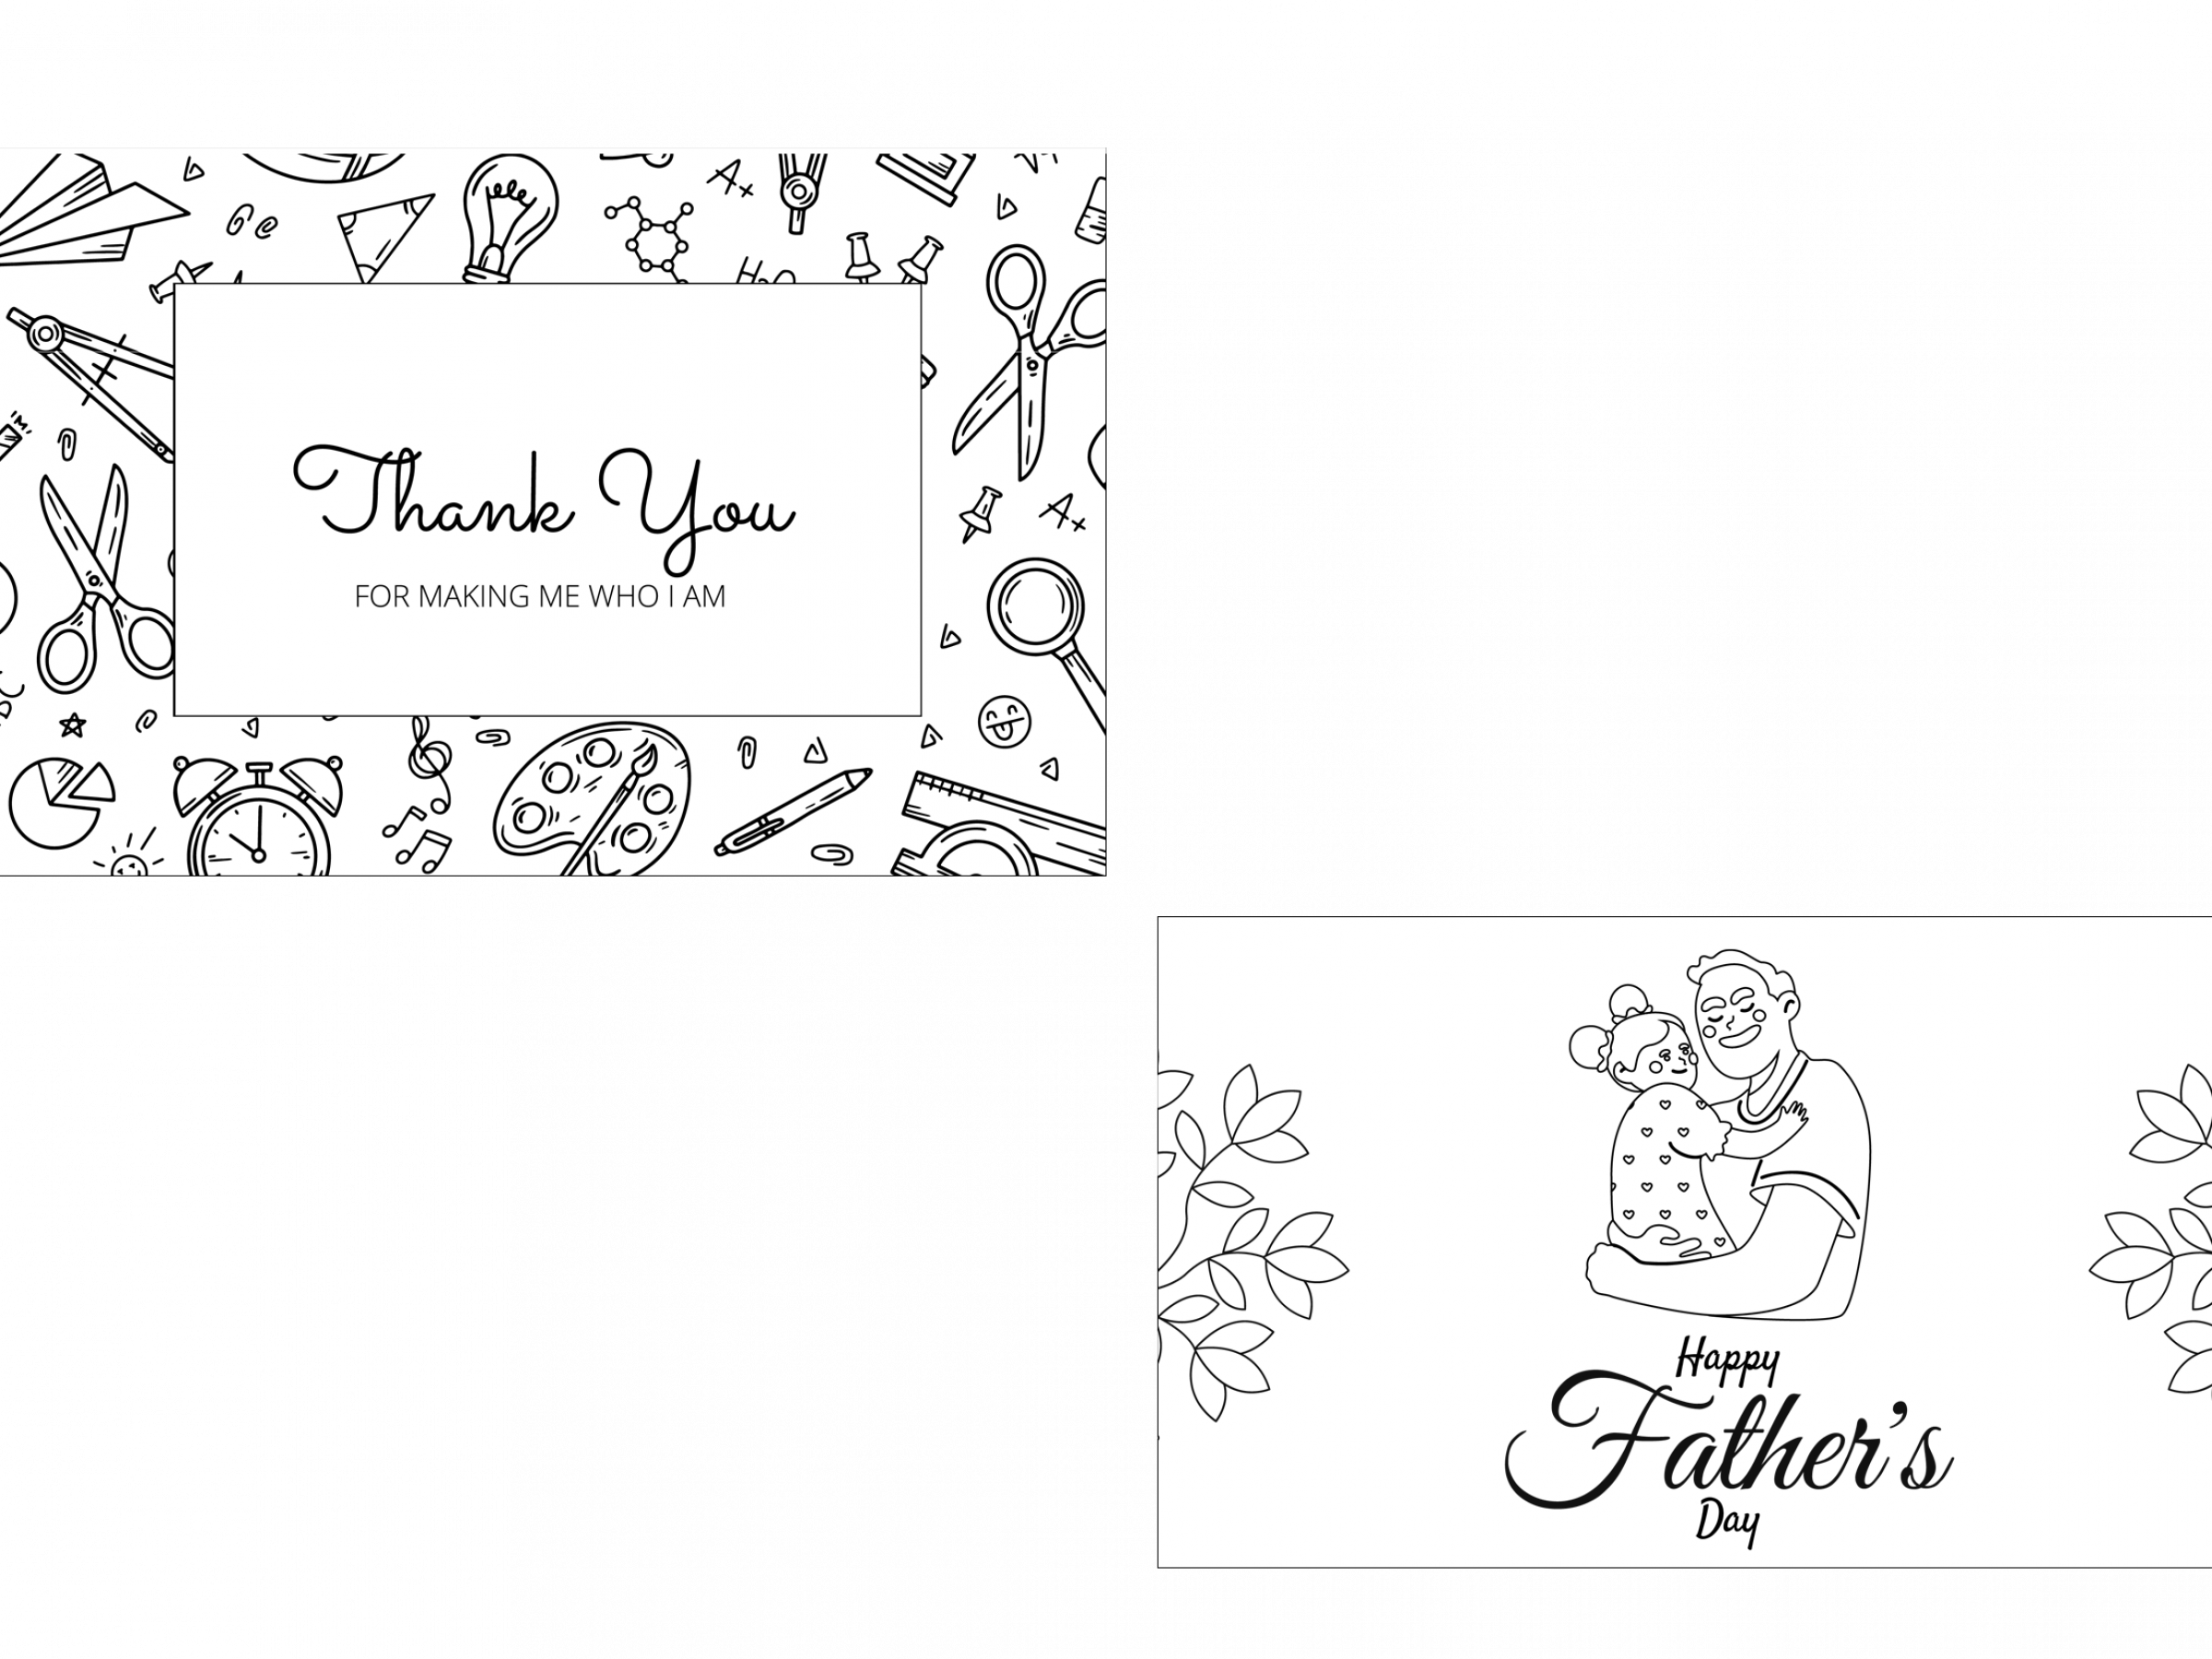 Solterra Fathers Day card example